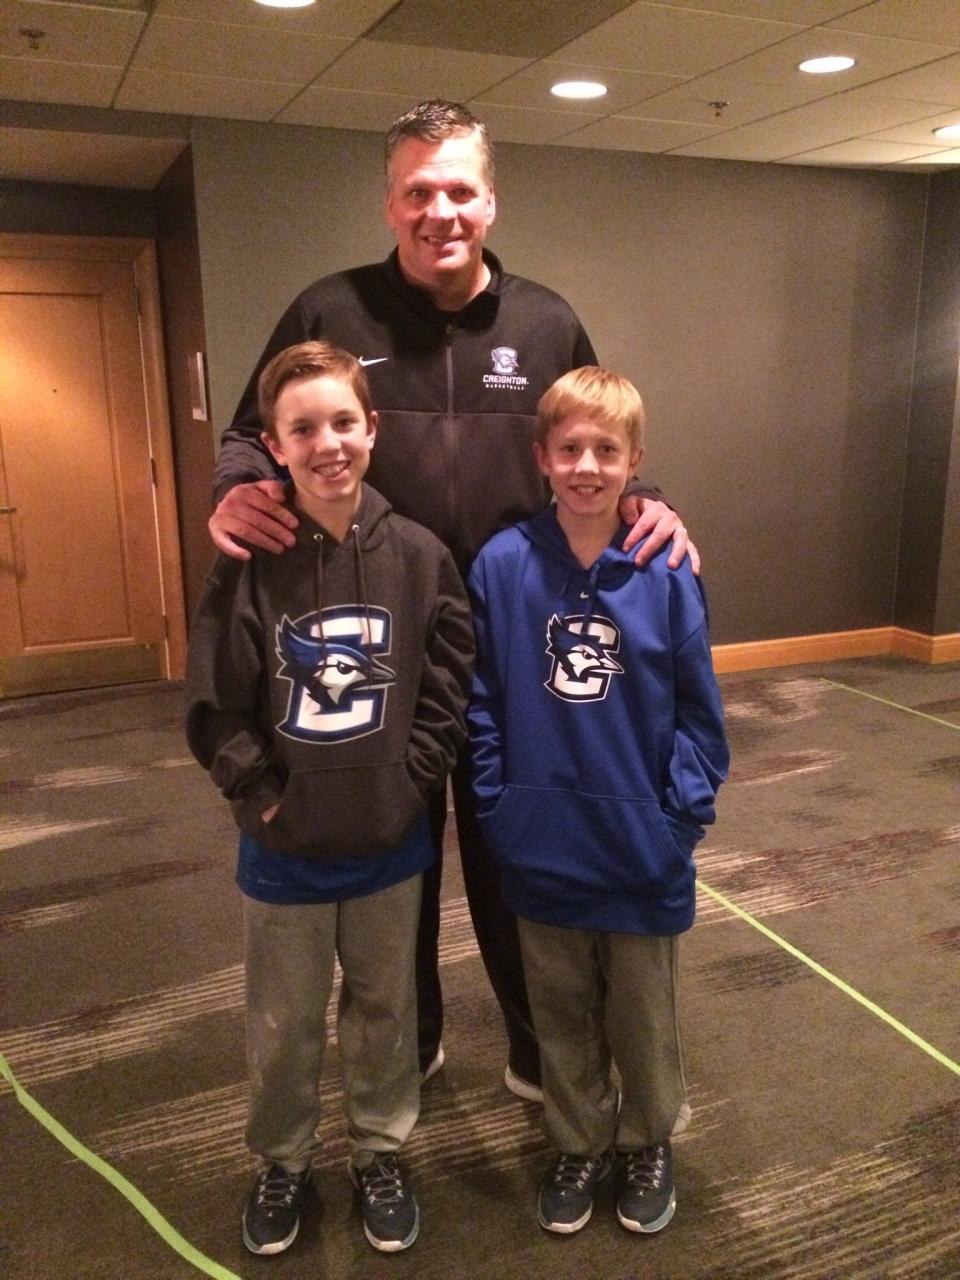 For University of Akron wing Zach Halligan, right, and his brother Ty, it will be a reunion of sorts when the Zips play Creighton in the NCAA Tournament, as this picture with Bluejays coach Greg McDermott shows.